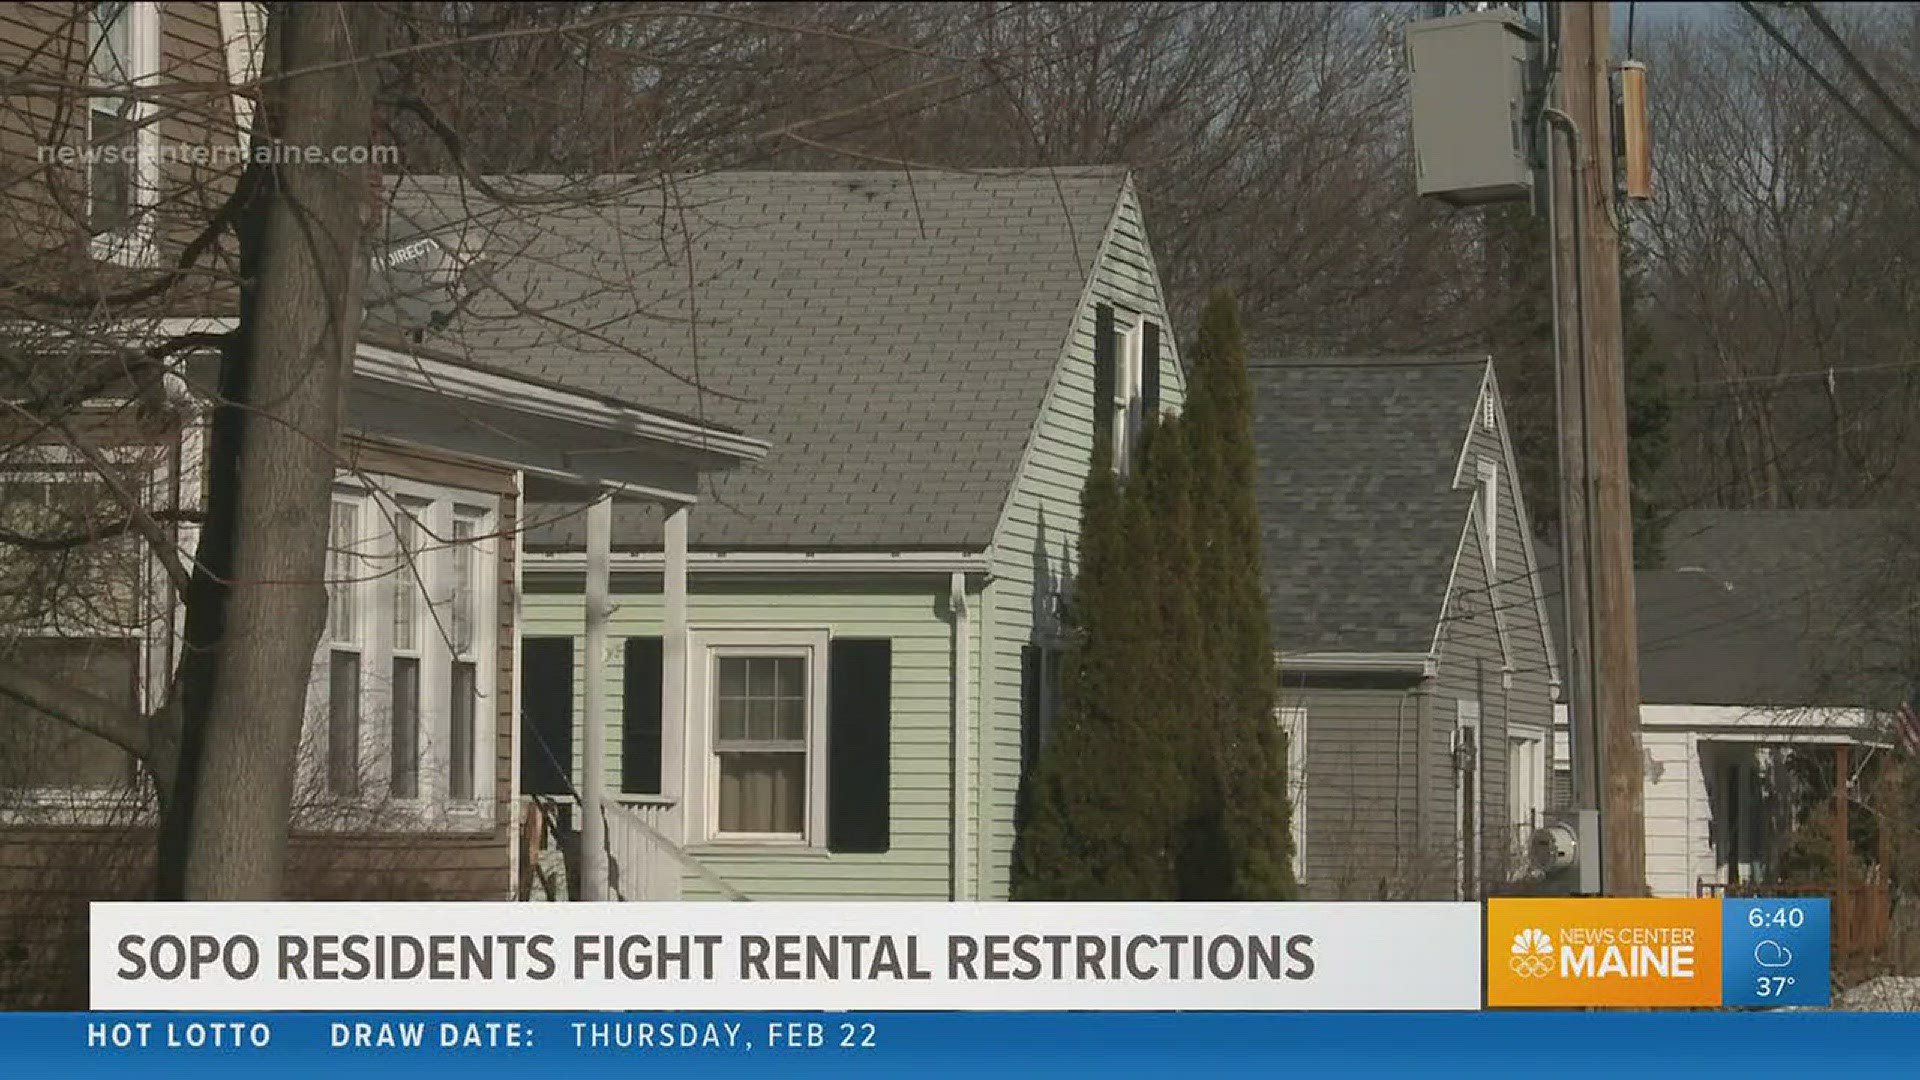 South Portland residents fight rental restrictions